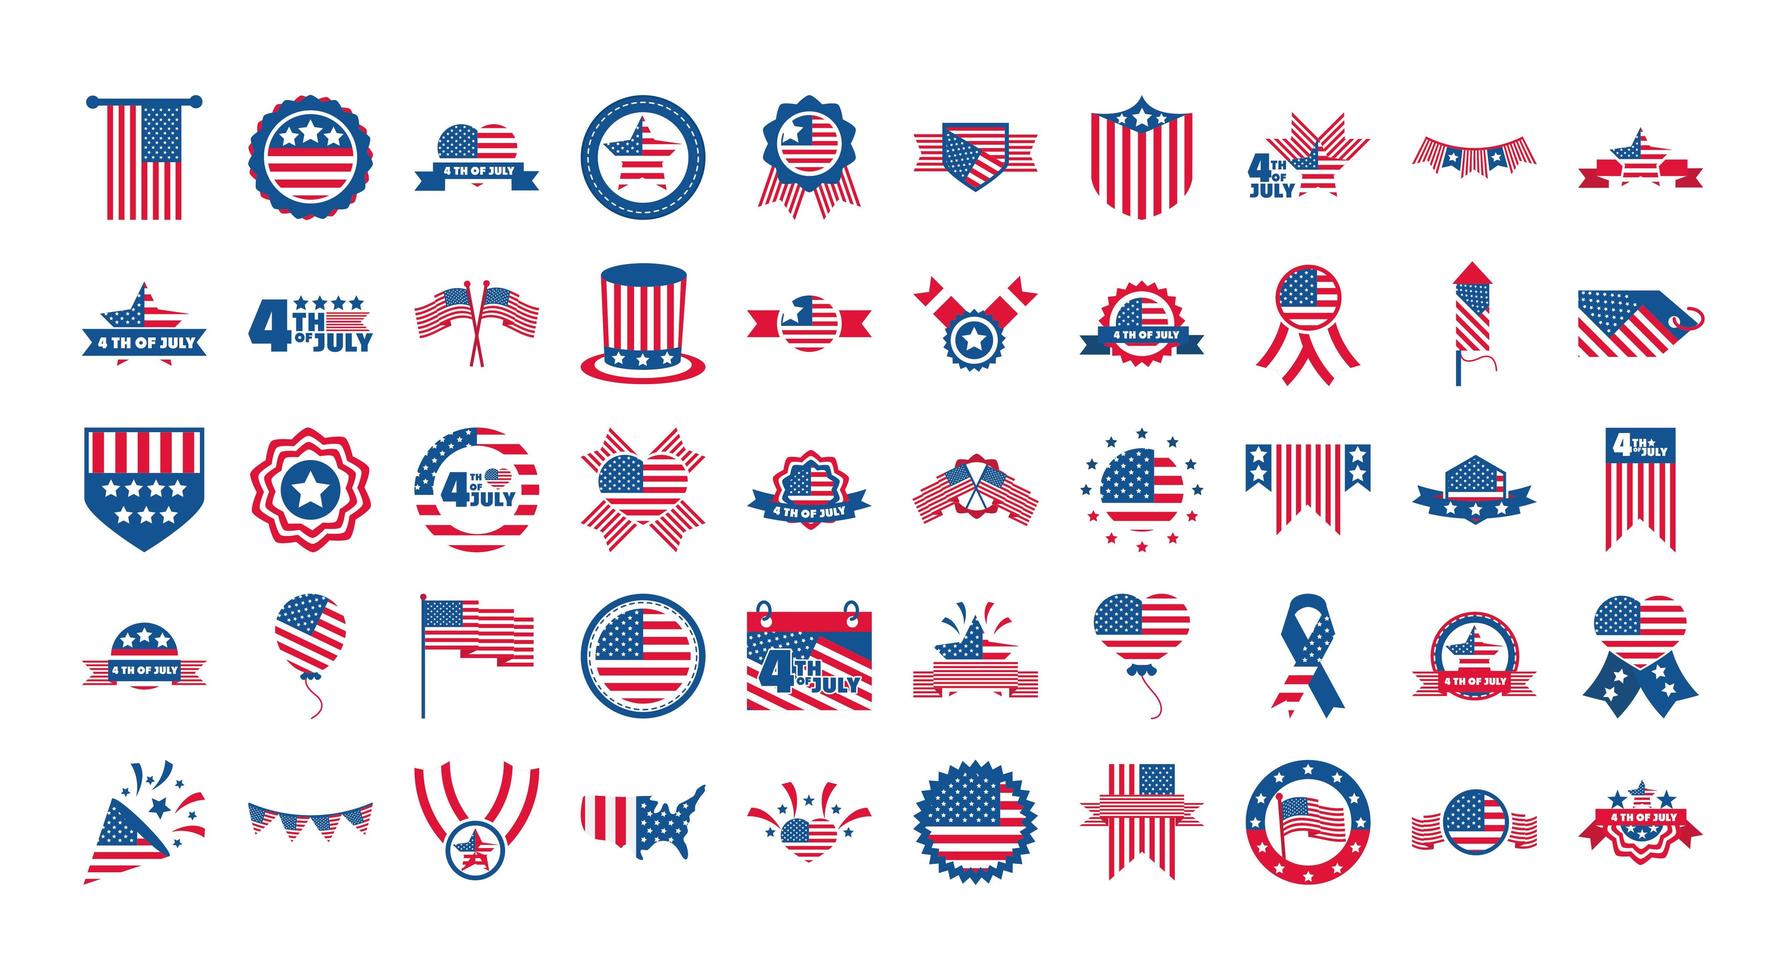 4th of july independence day celebration honor memorial american flag icons set flat style icon vector